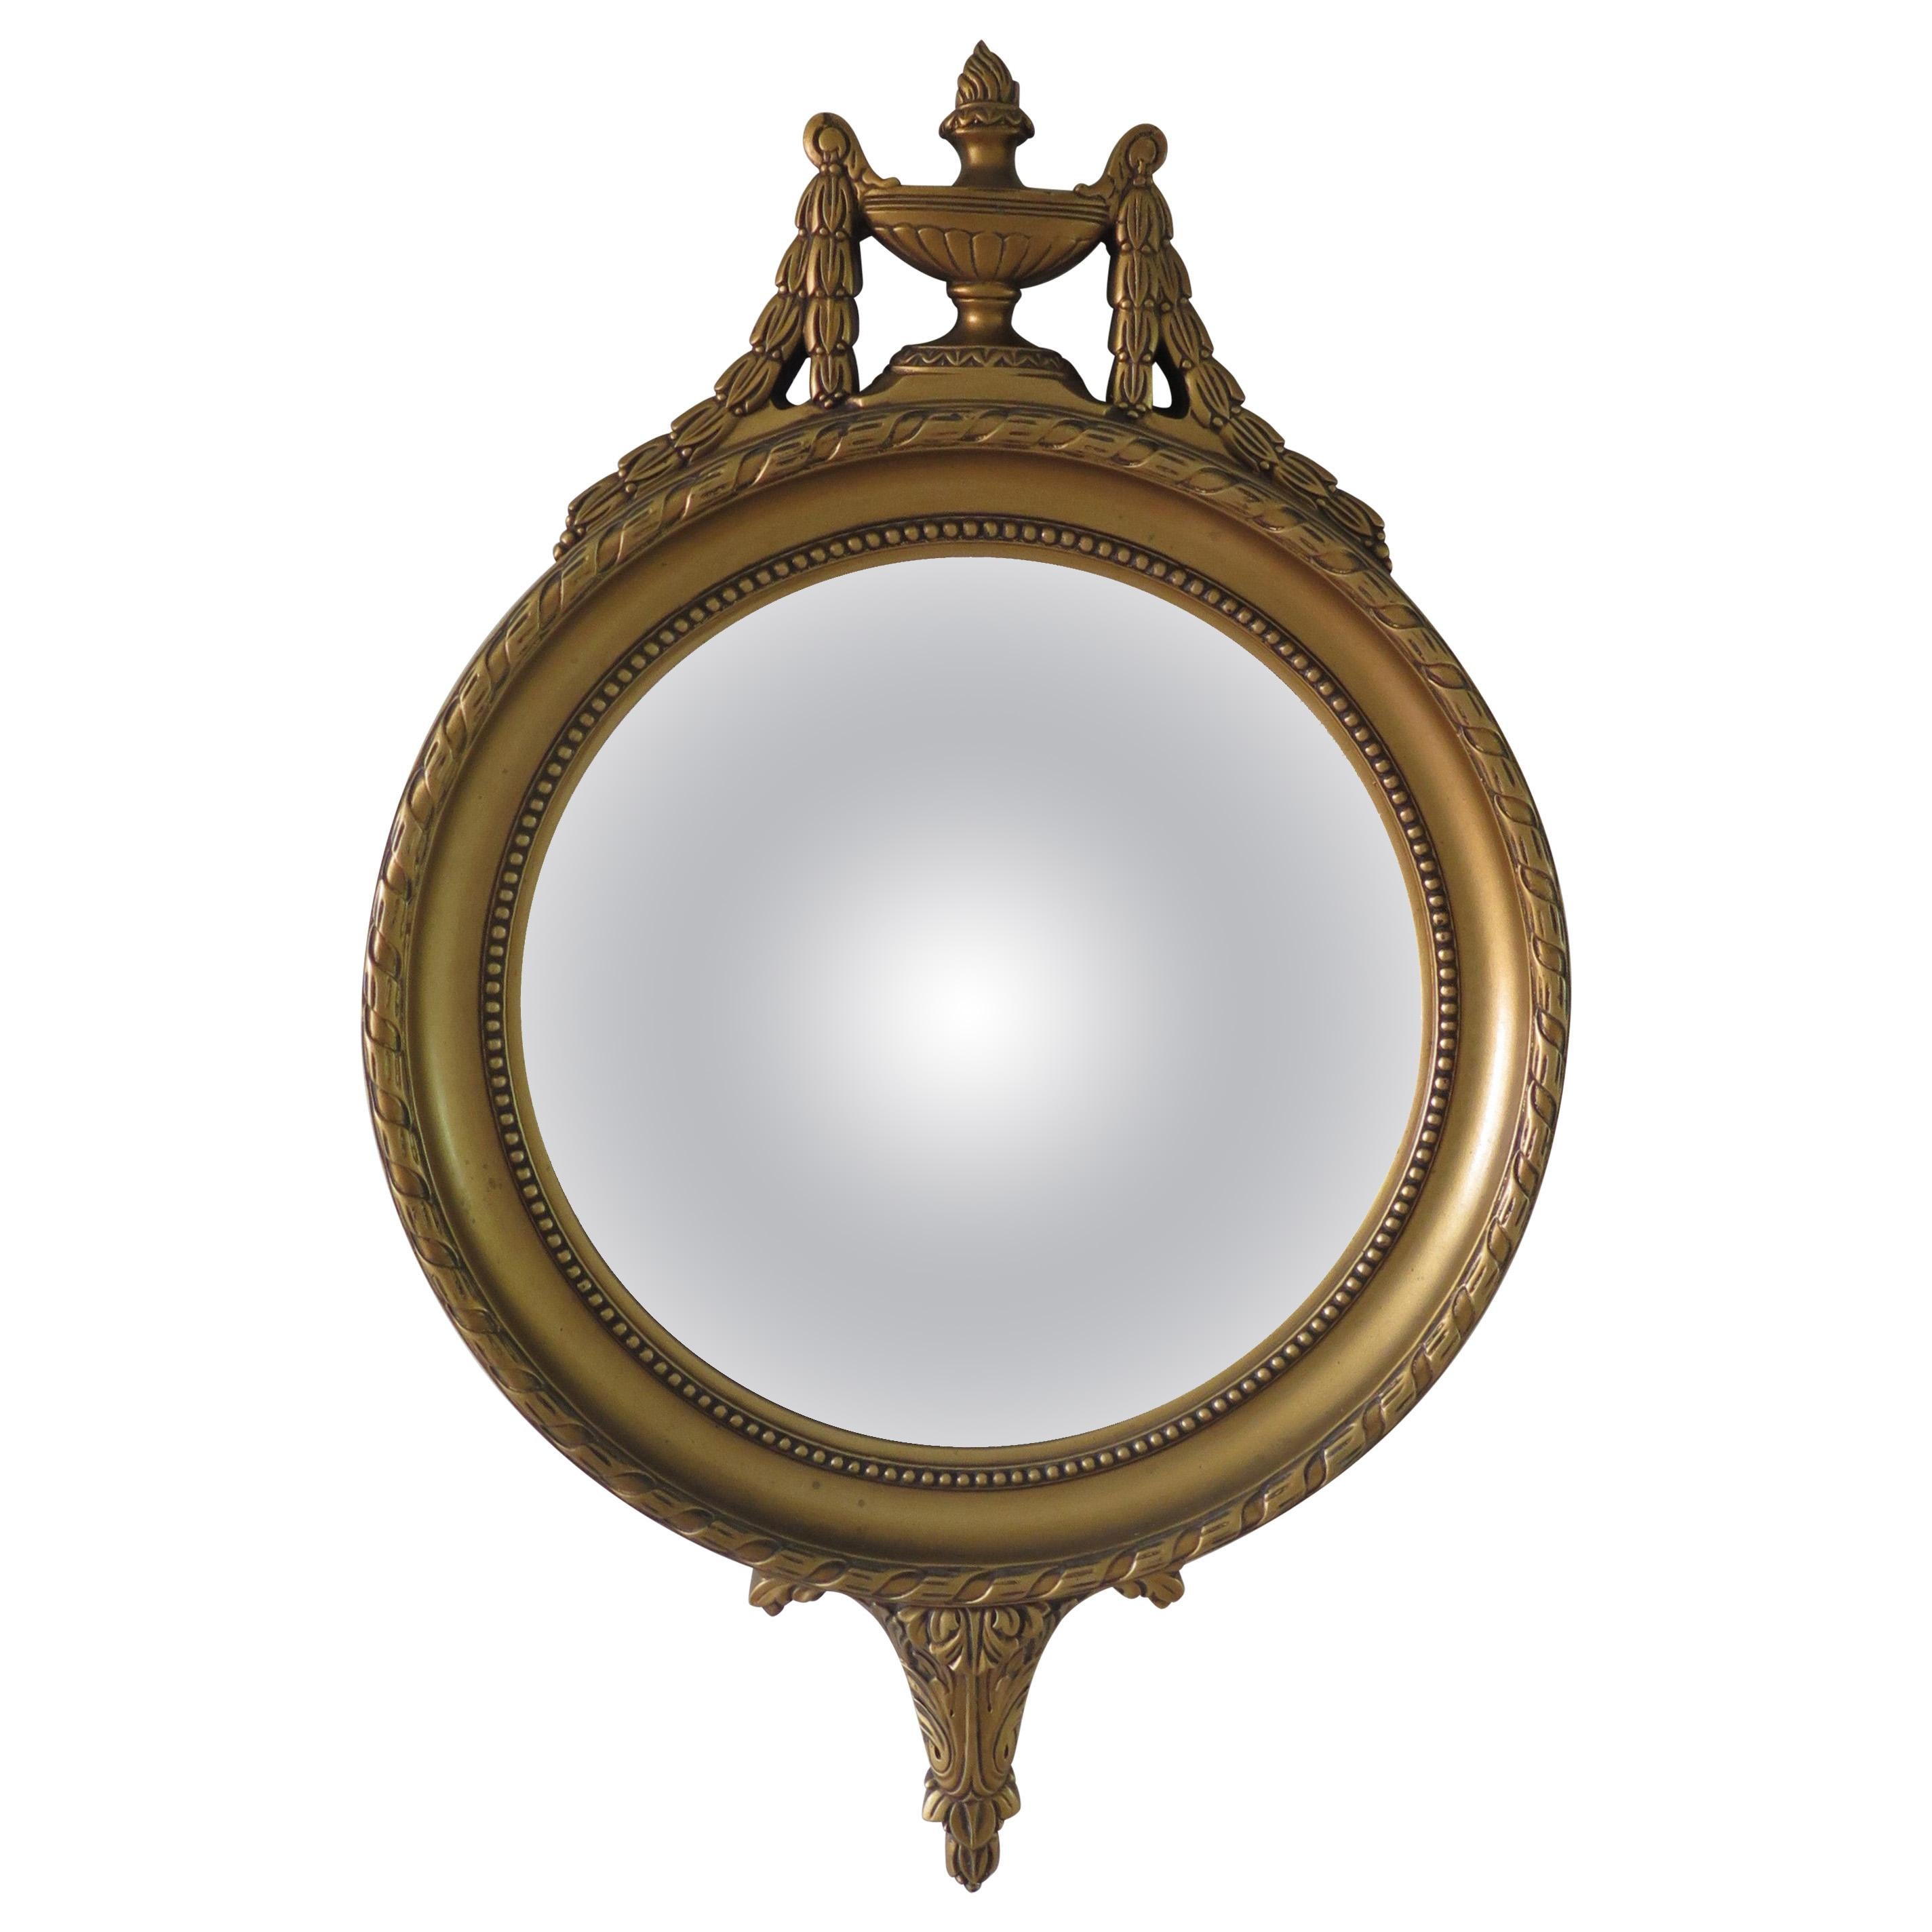 French Convex Wall Mirror in the Empire Style Gilt Wood, Circa 1930s